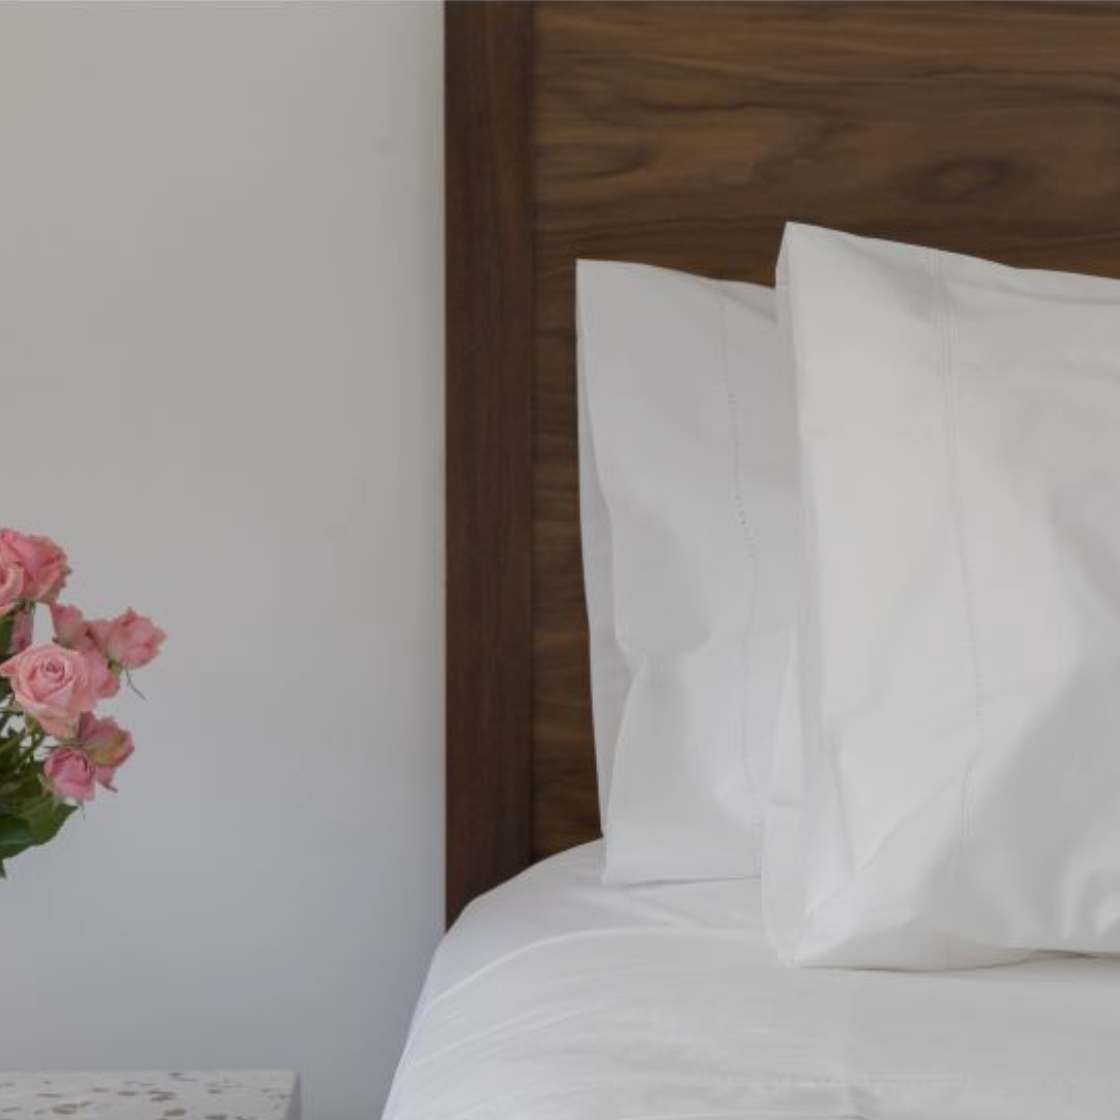 500 Thread Count 100% Egyptian Cotton Percale Sheets With Hemstitch Detail